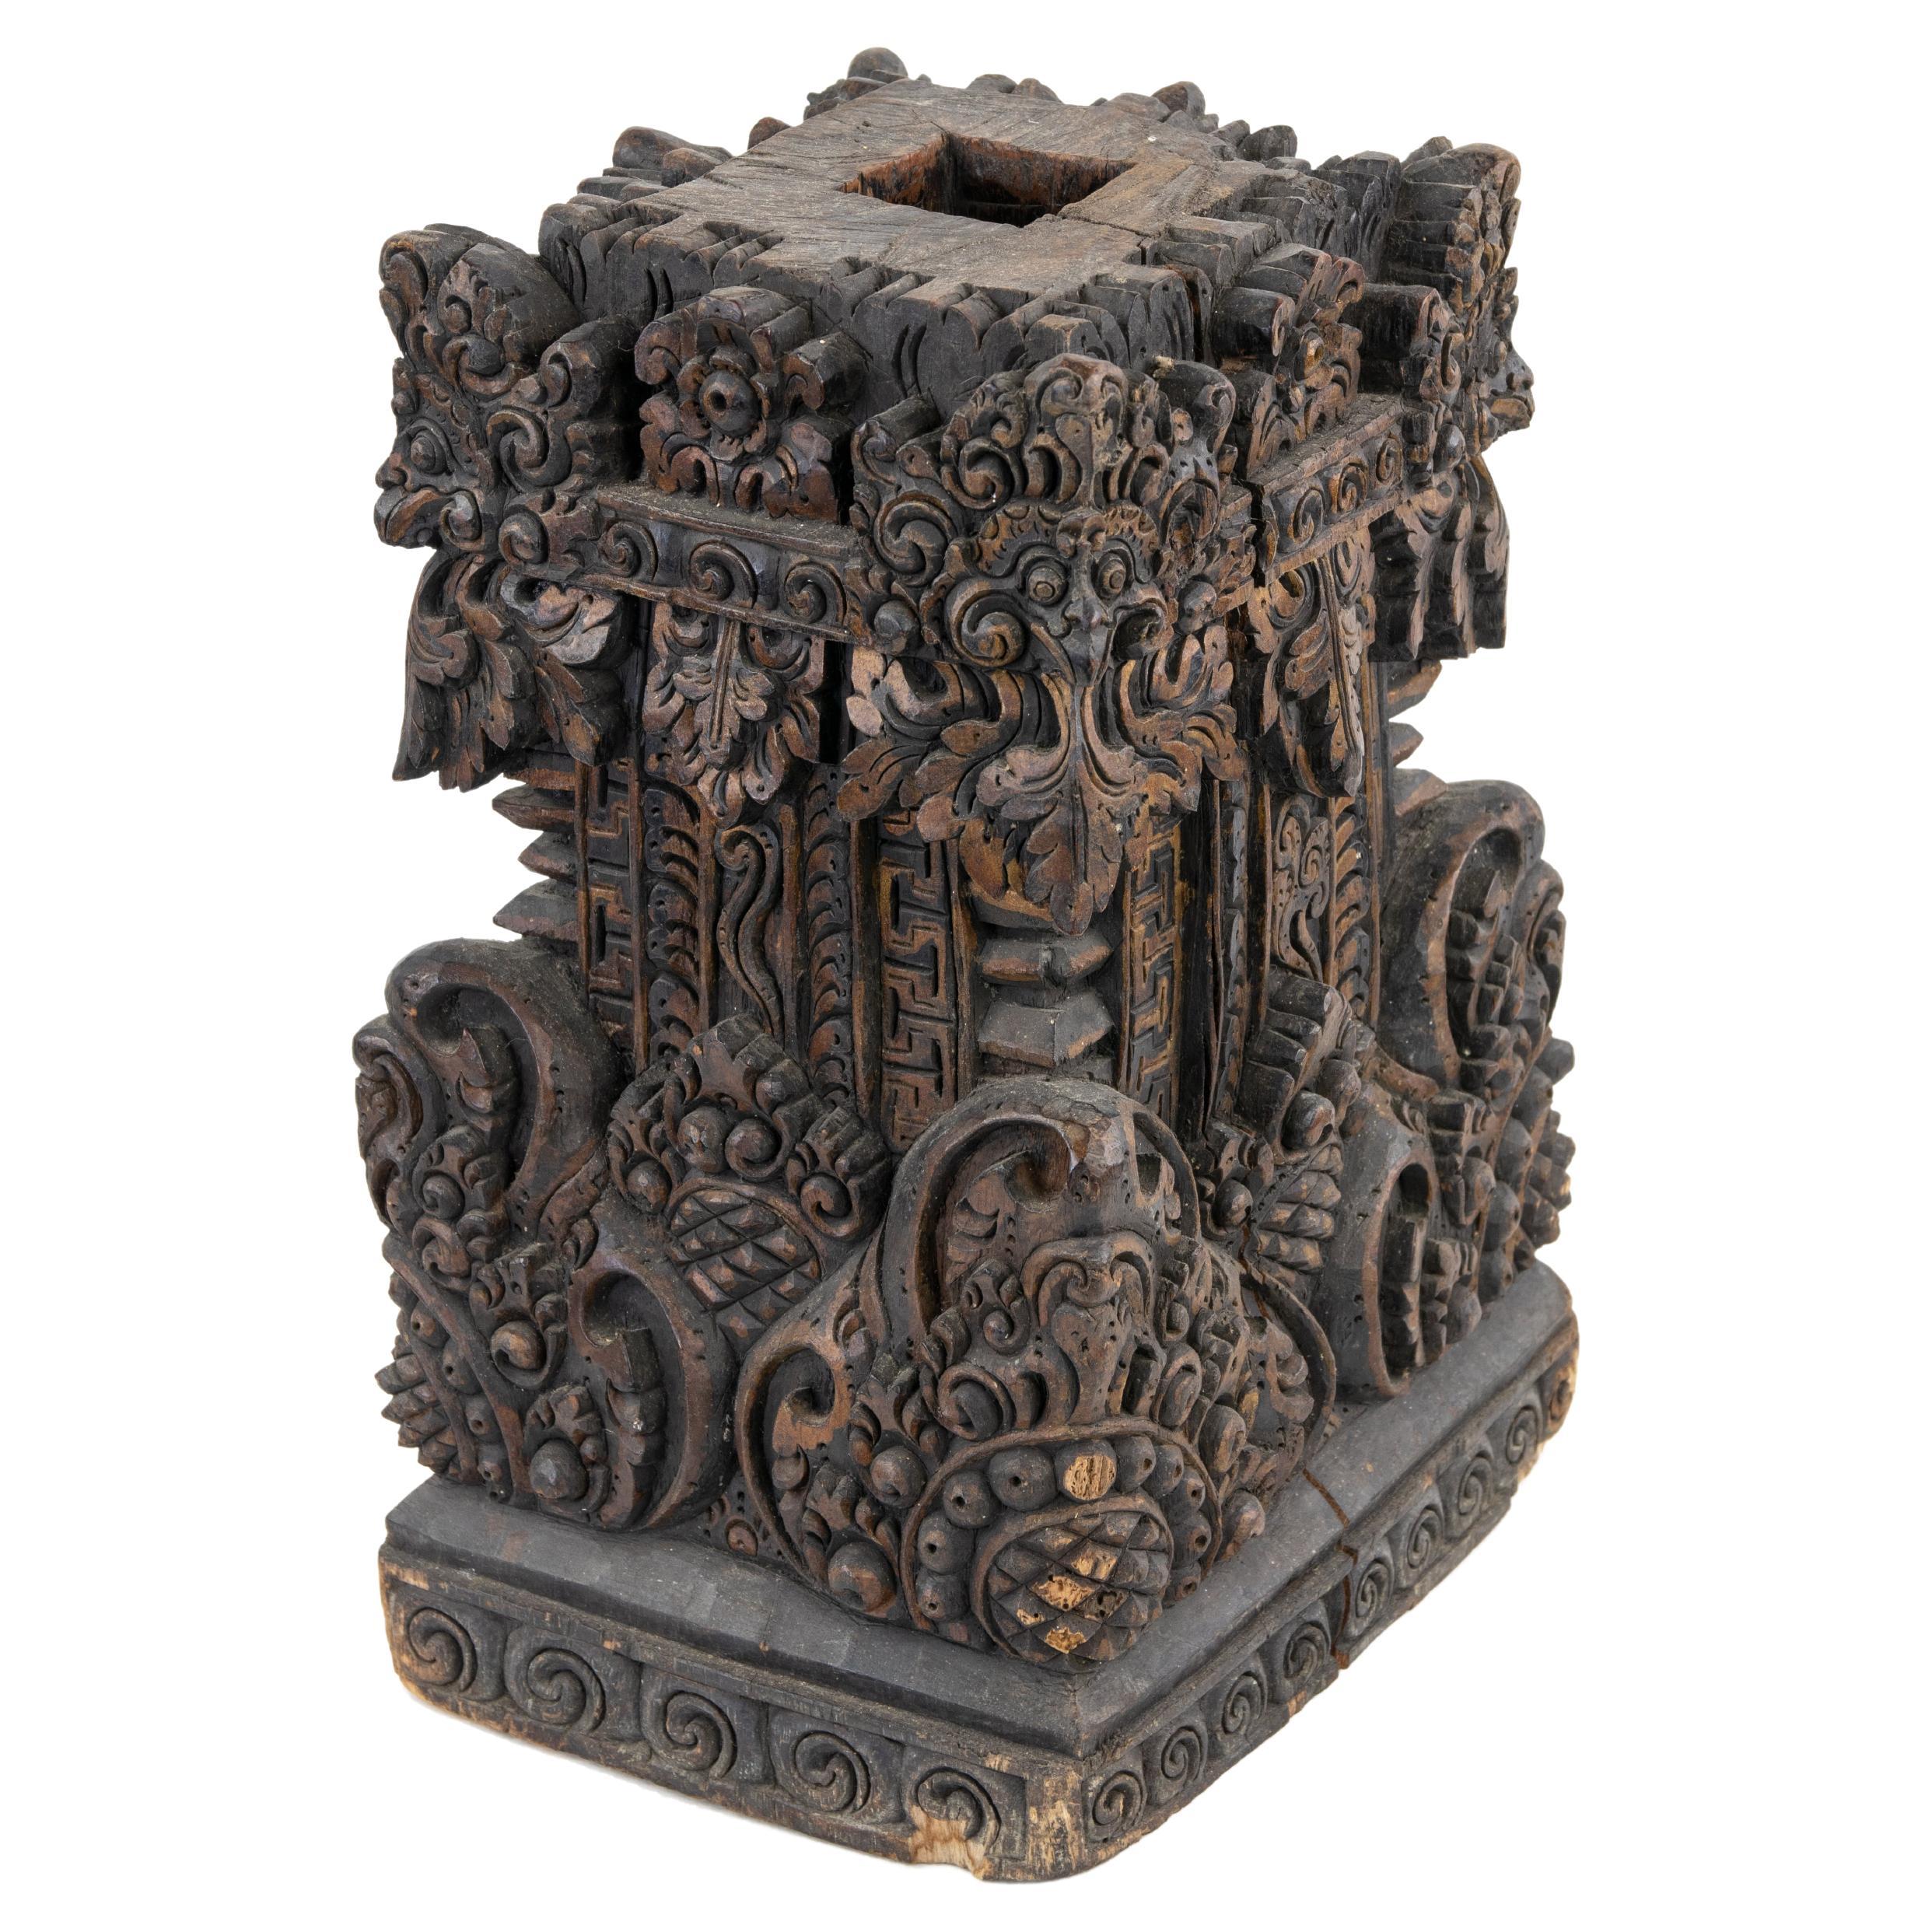 Base from Bali in Carved Wood